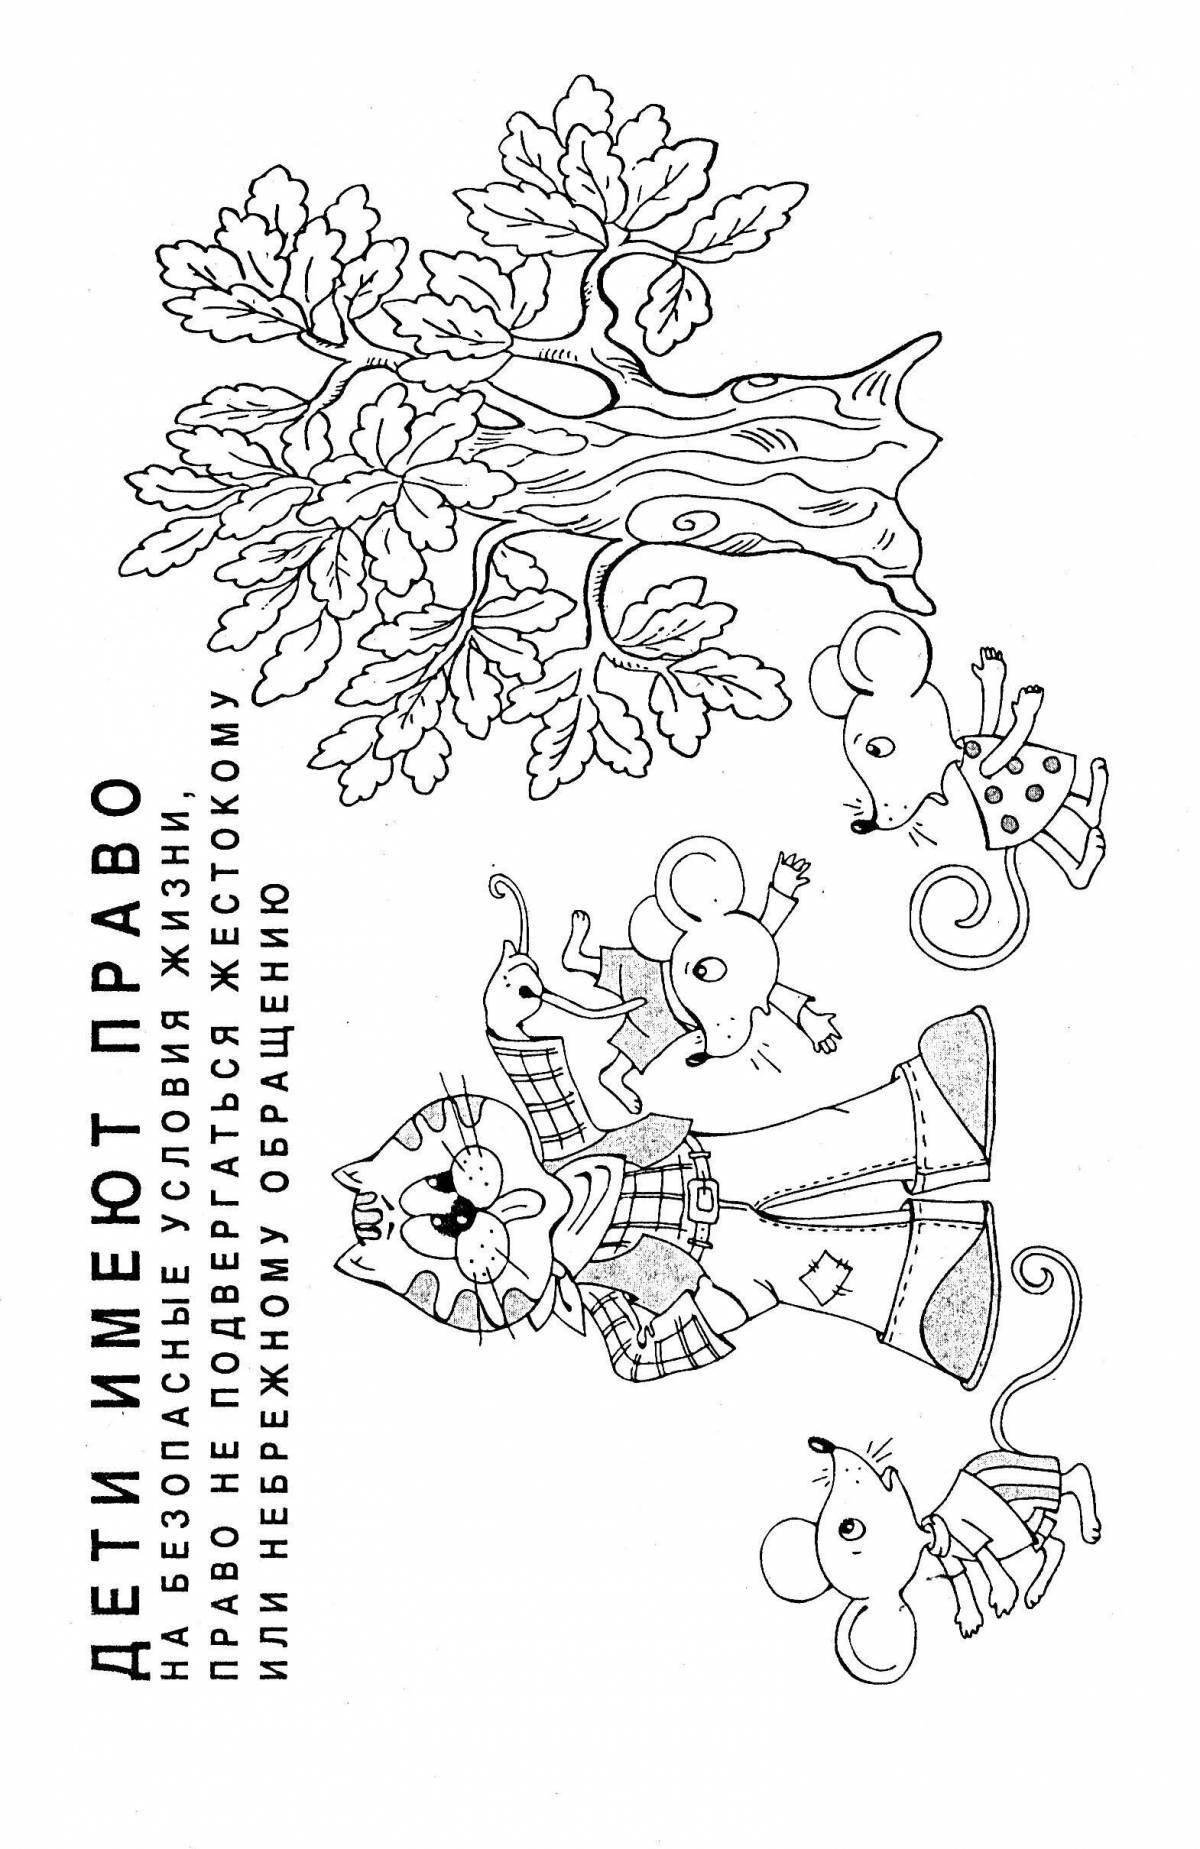 Bright rights and responsibilities of children coloring pages